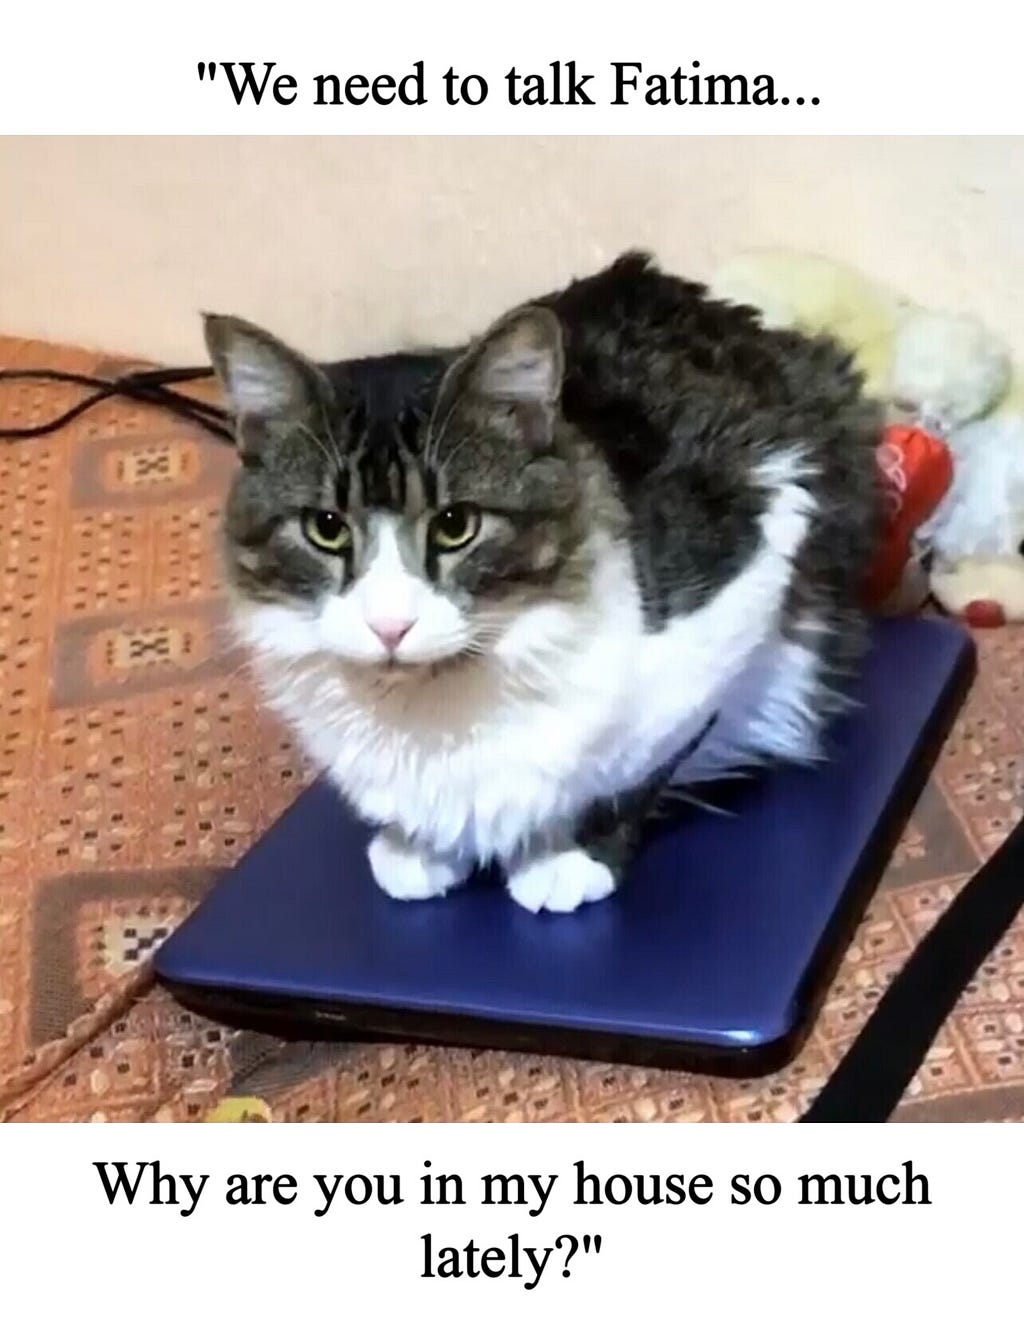 A cat sitting on a laptop